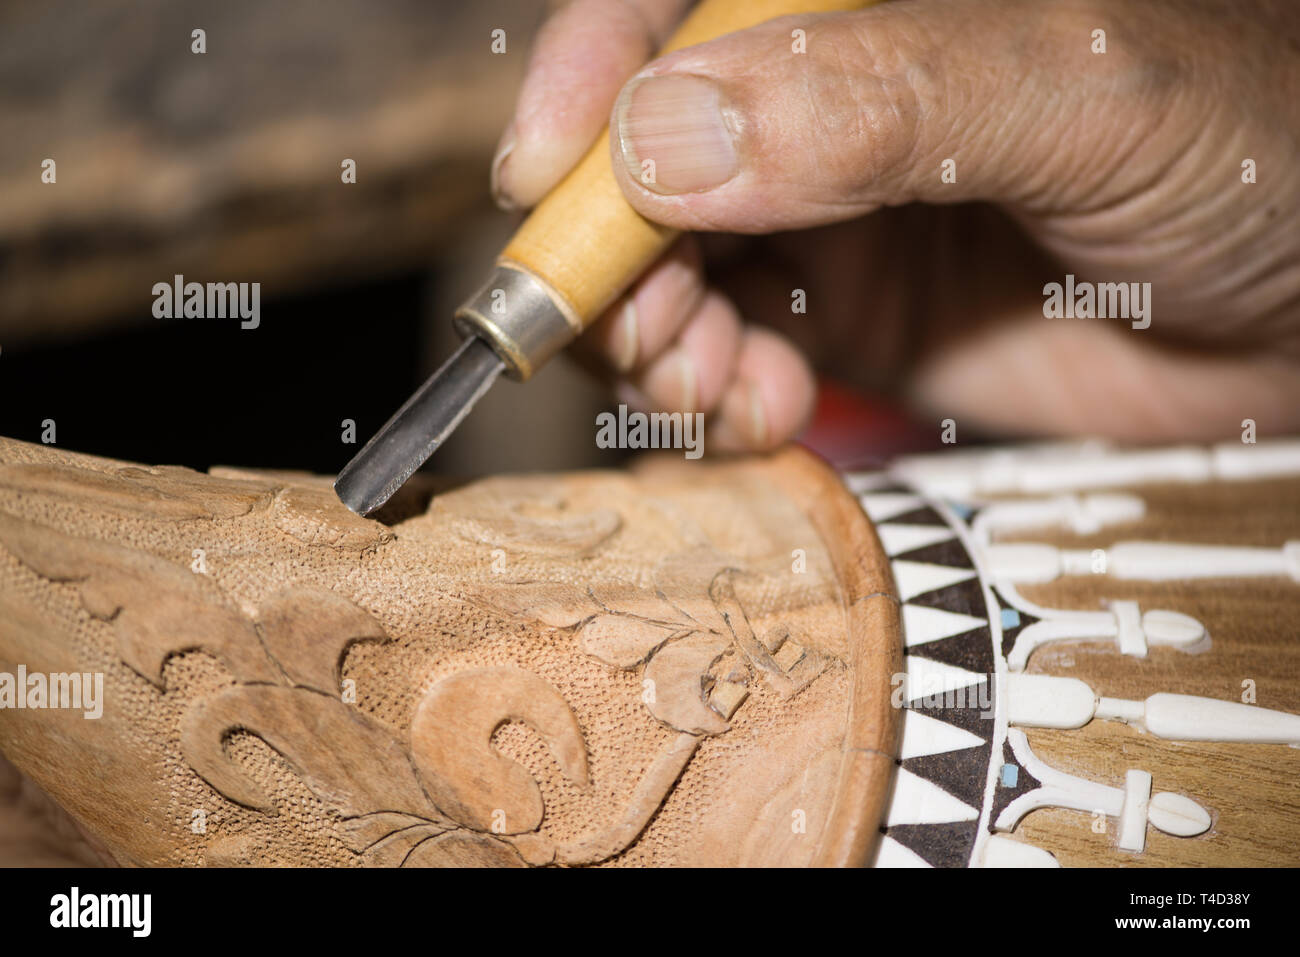 adult master restores old musical instruments. wood carving Stock Photo